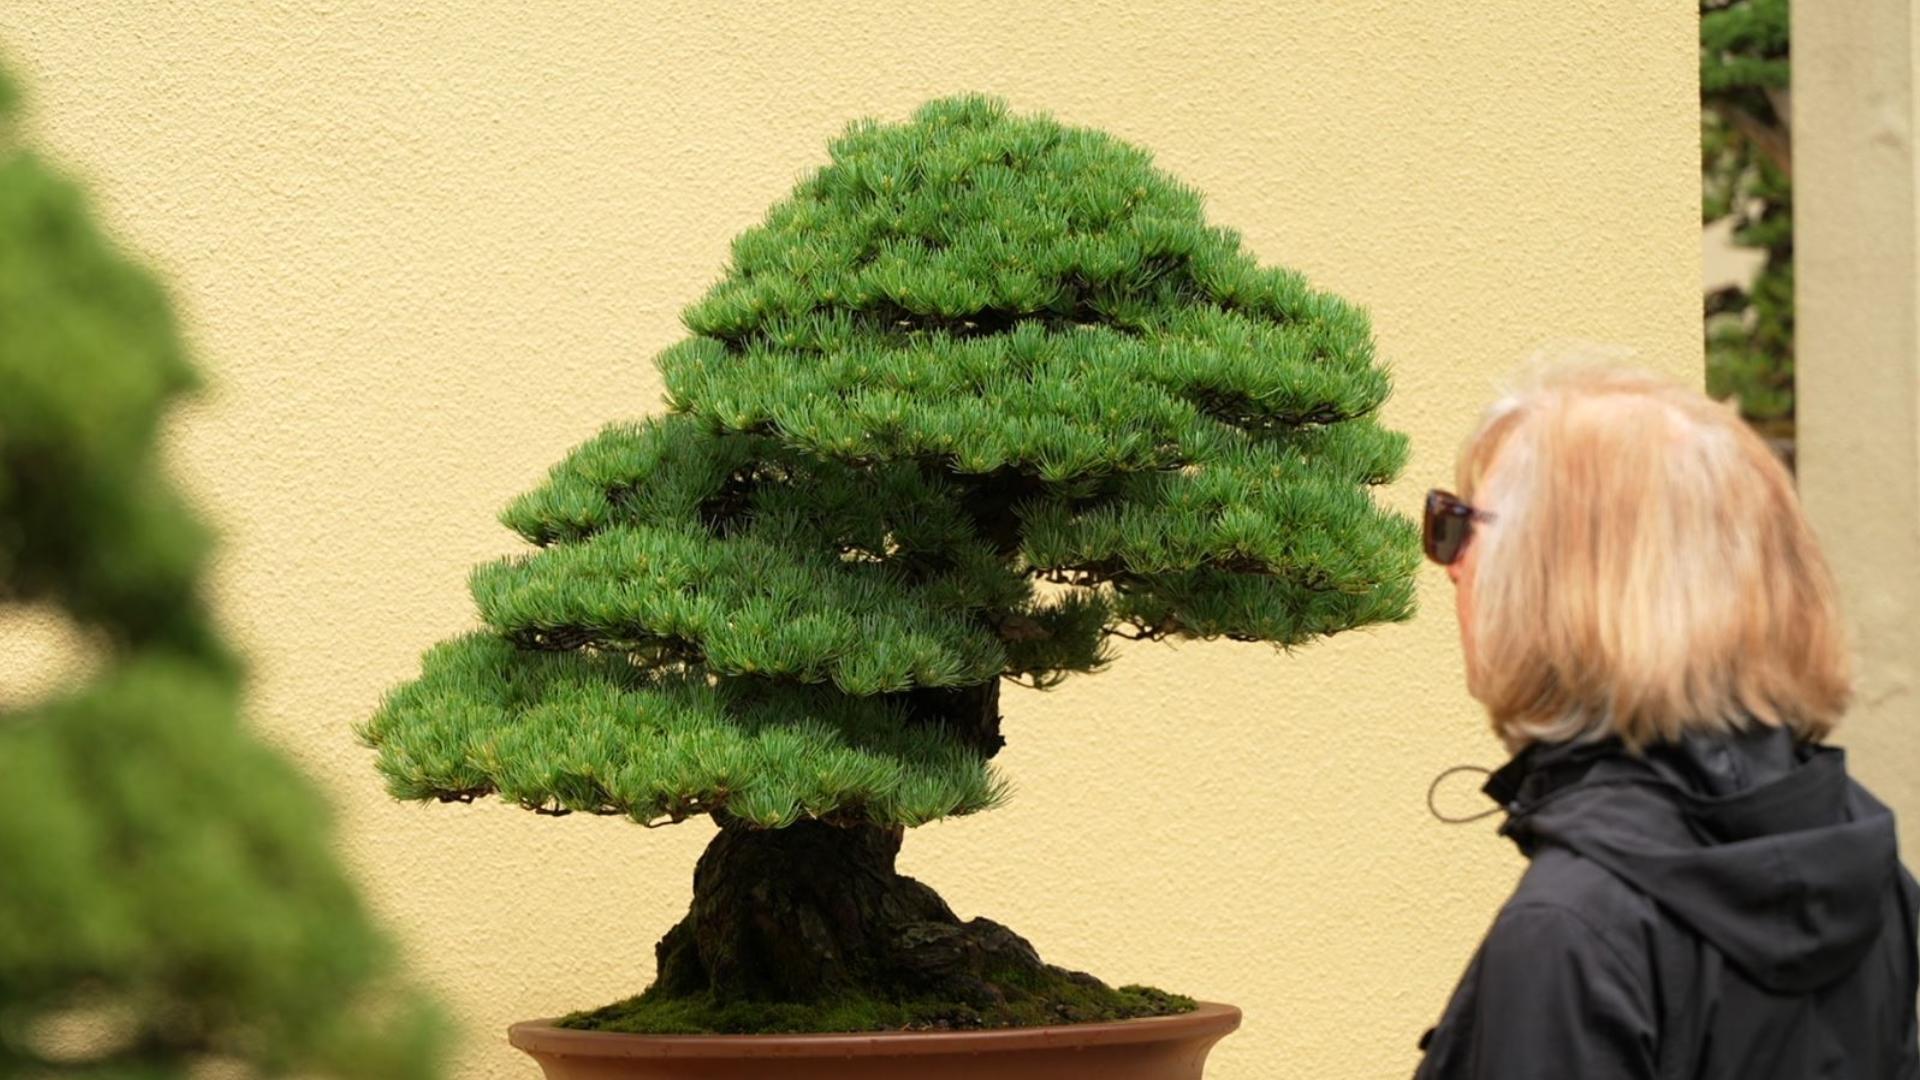 Pacific Bonsai Museum in Federal Way is holding its annual BonsaiFEST - including tours, classes, food trucks and pop-up shops. #k5evening